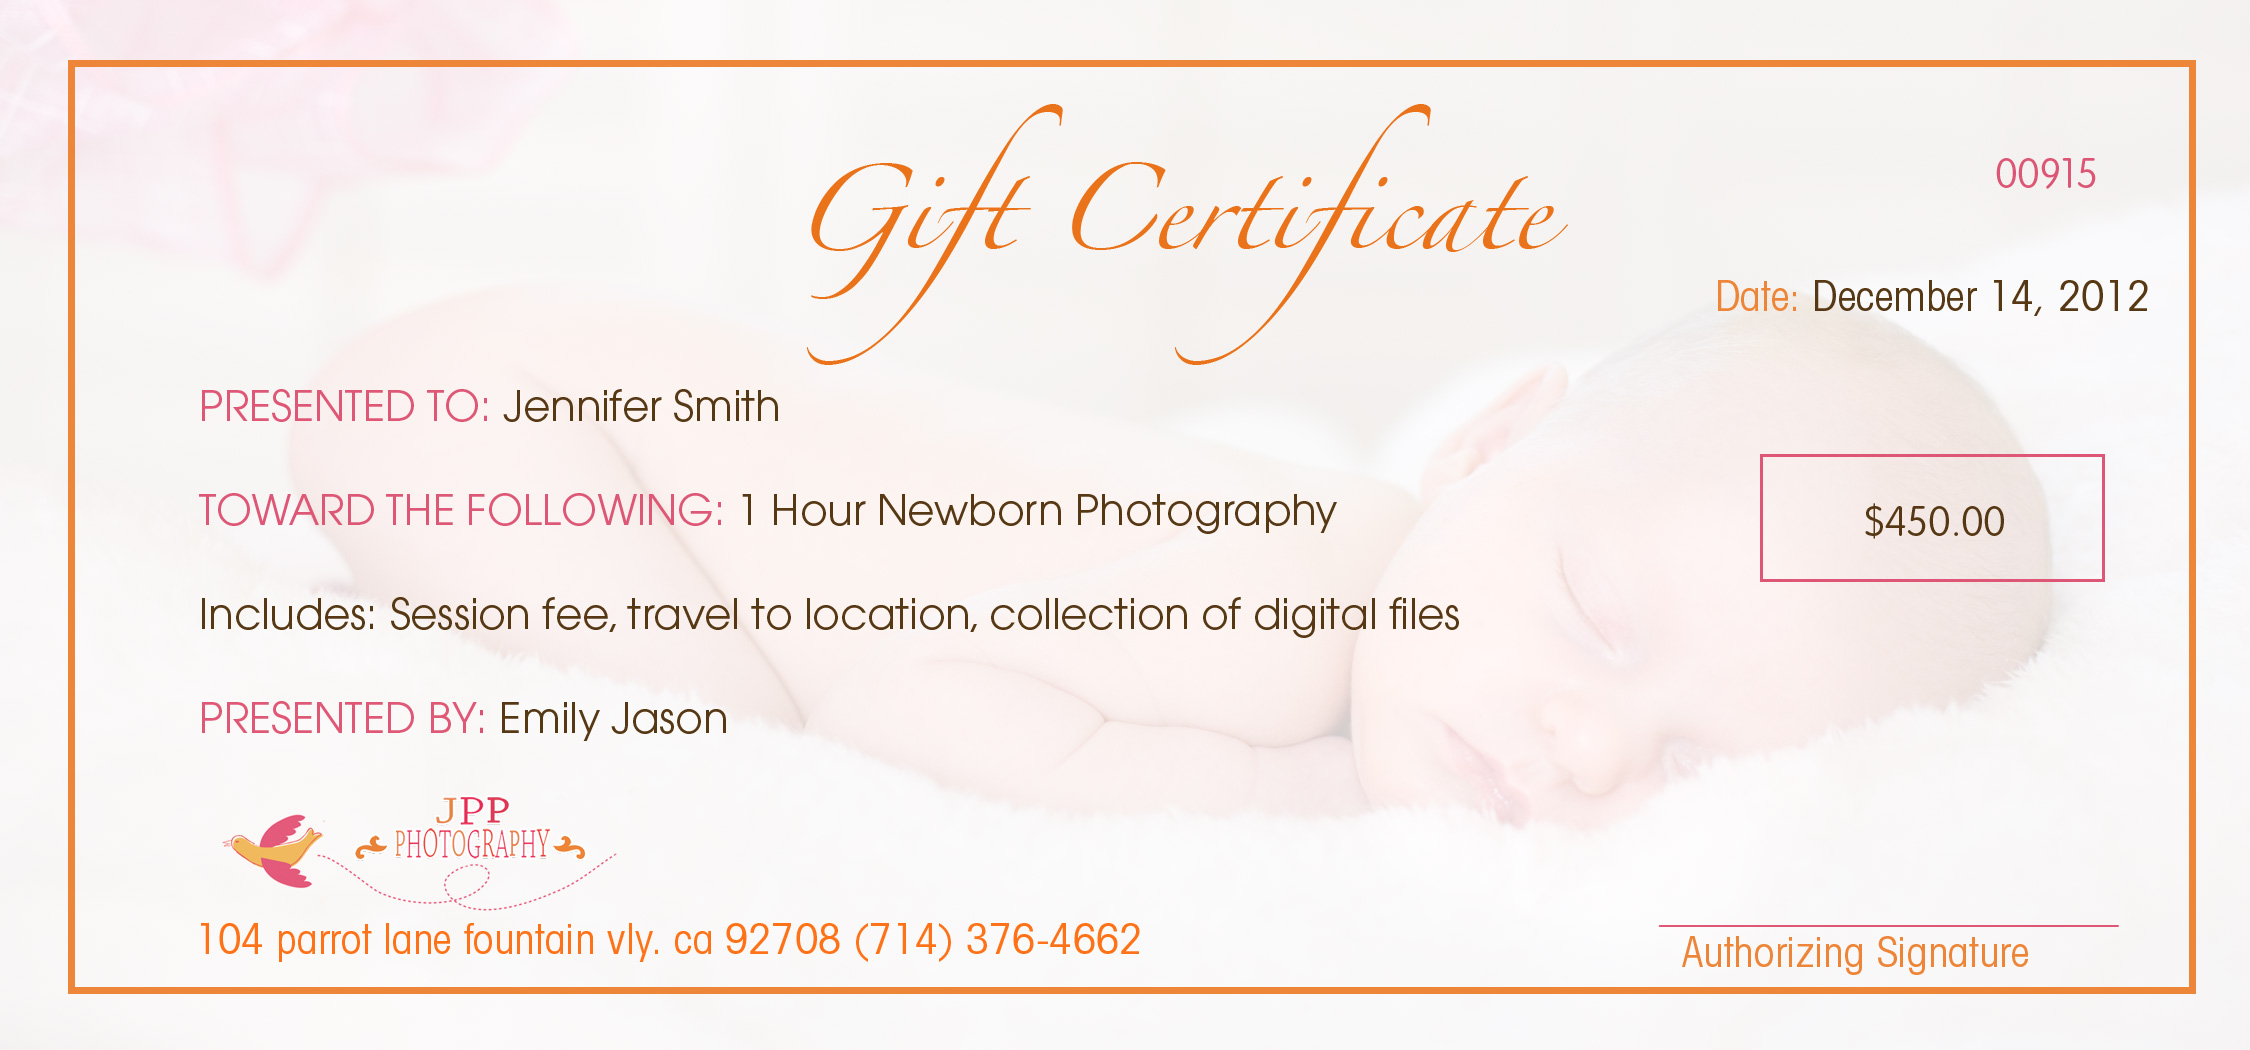 Gift Certificate Template Word 2010 from jppblog.com